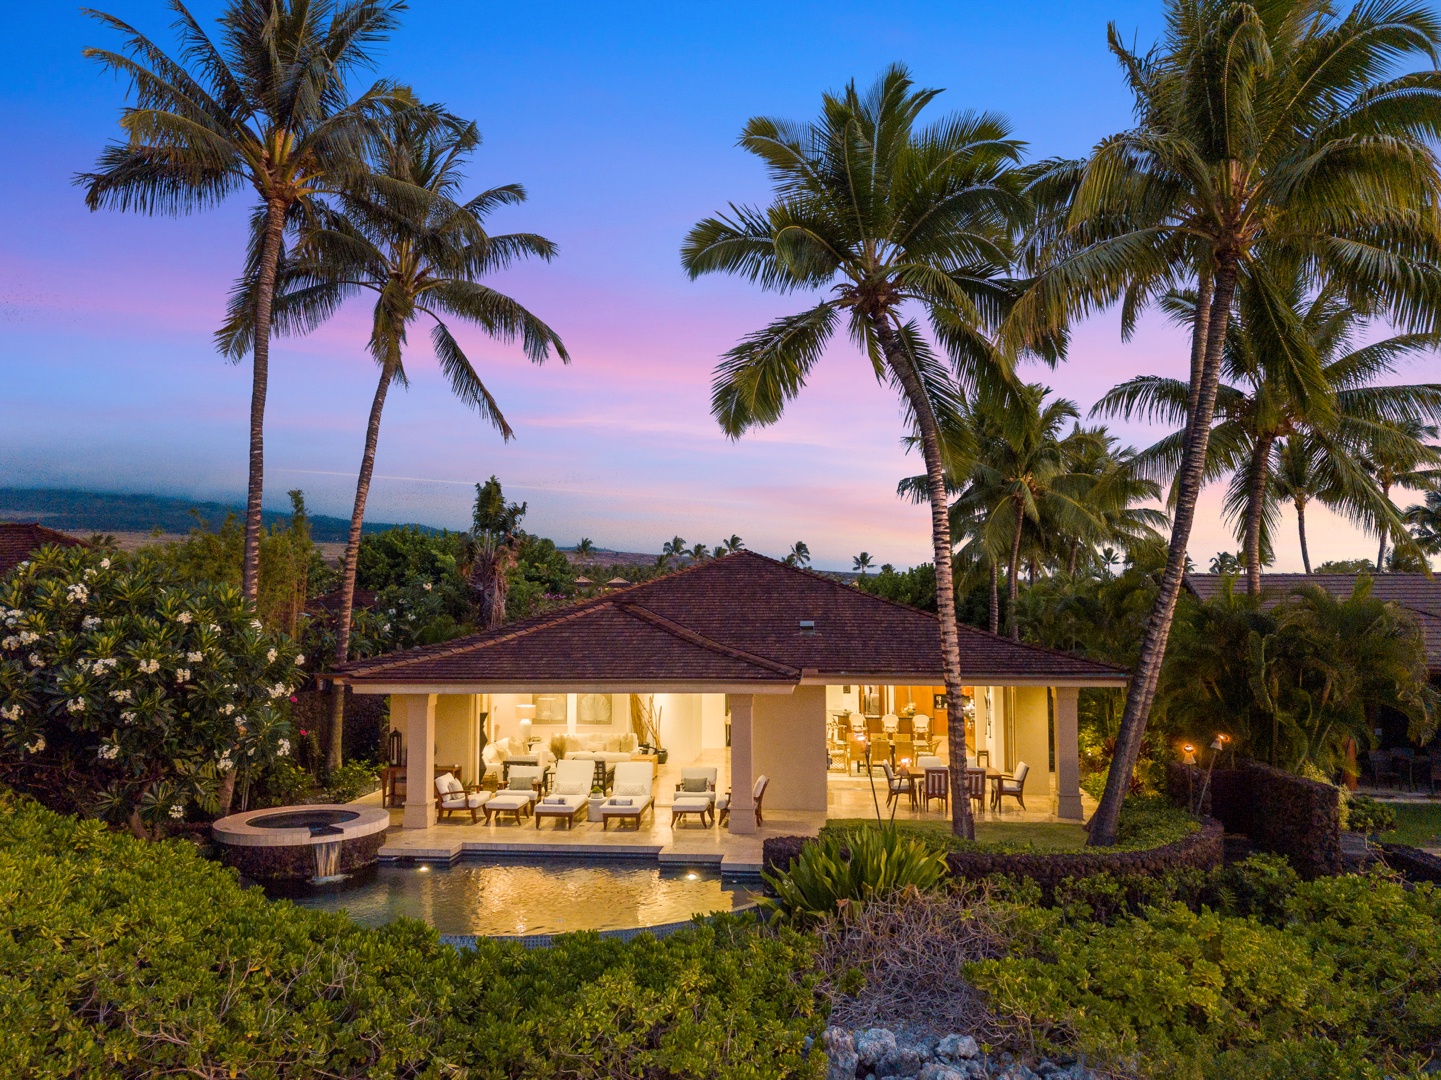 Kailua Kona Vacation Rentals, 4BD Pakui Street (147) Estate Home at Four Seasons Resort at Hualalai - Exquisite newly remodeled and redesigned estate home with private pool & spa at twilight.